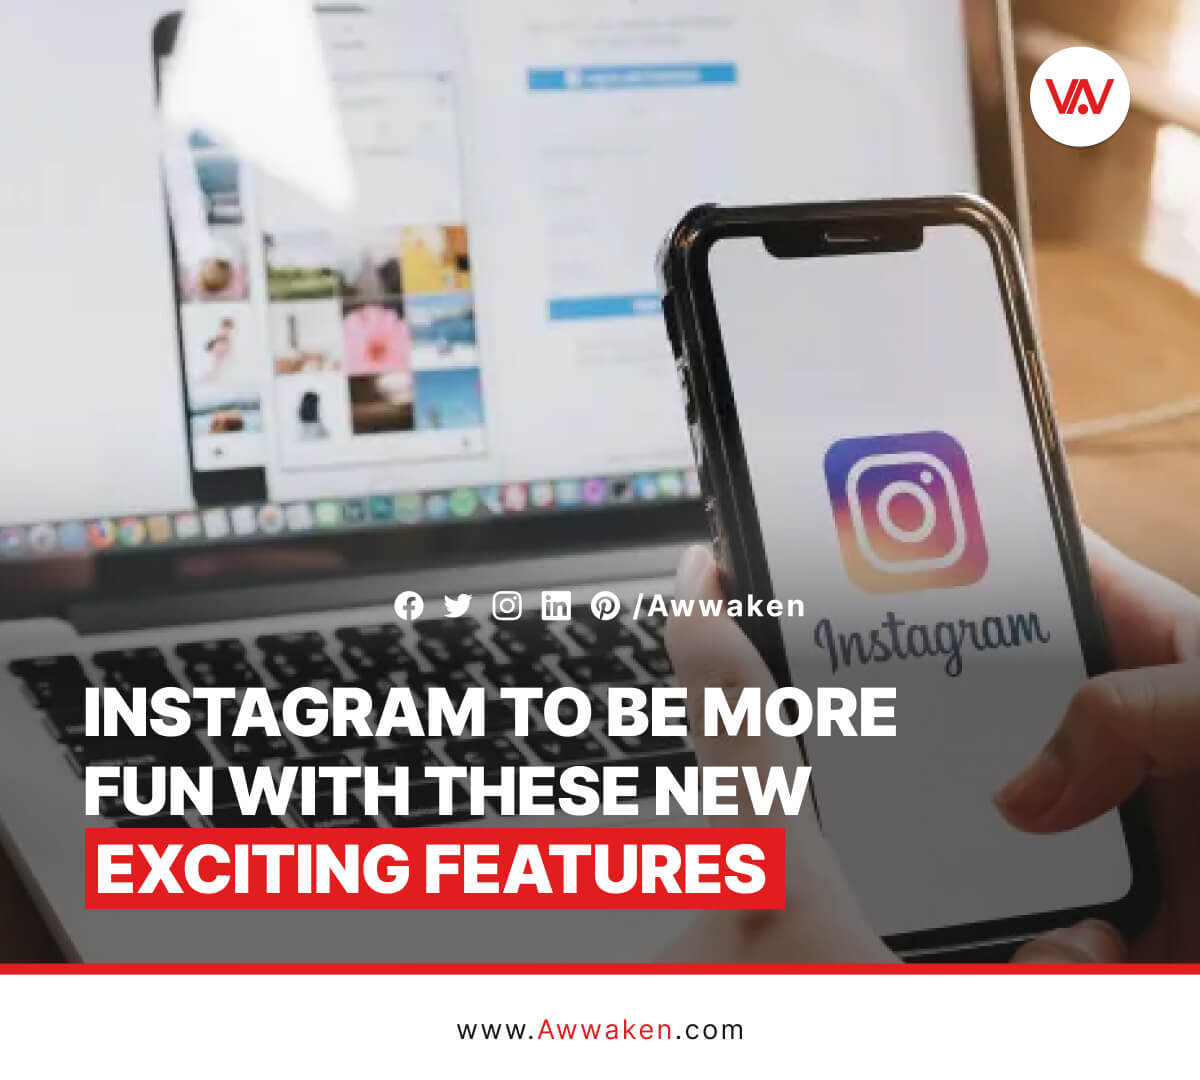 Instagram to be more FUN with these new exciting features_awwaken